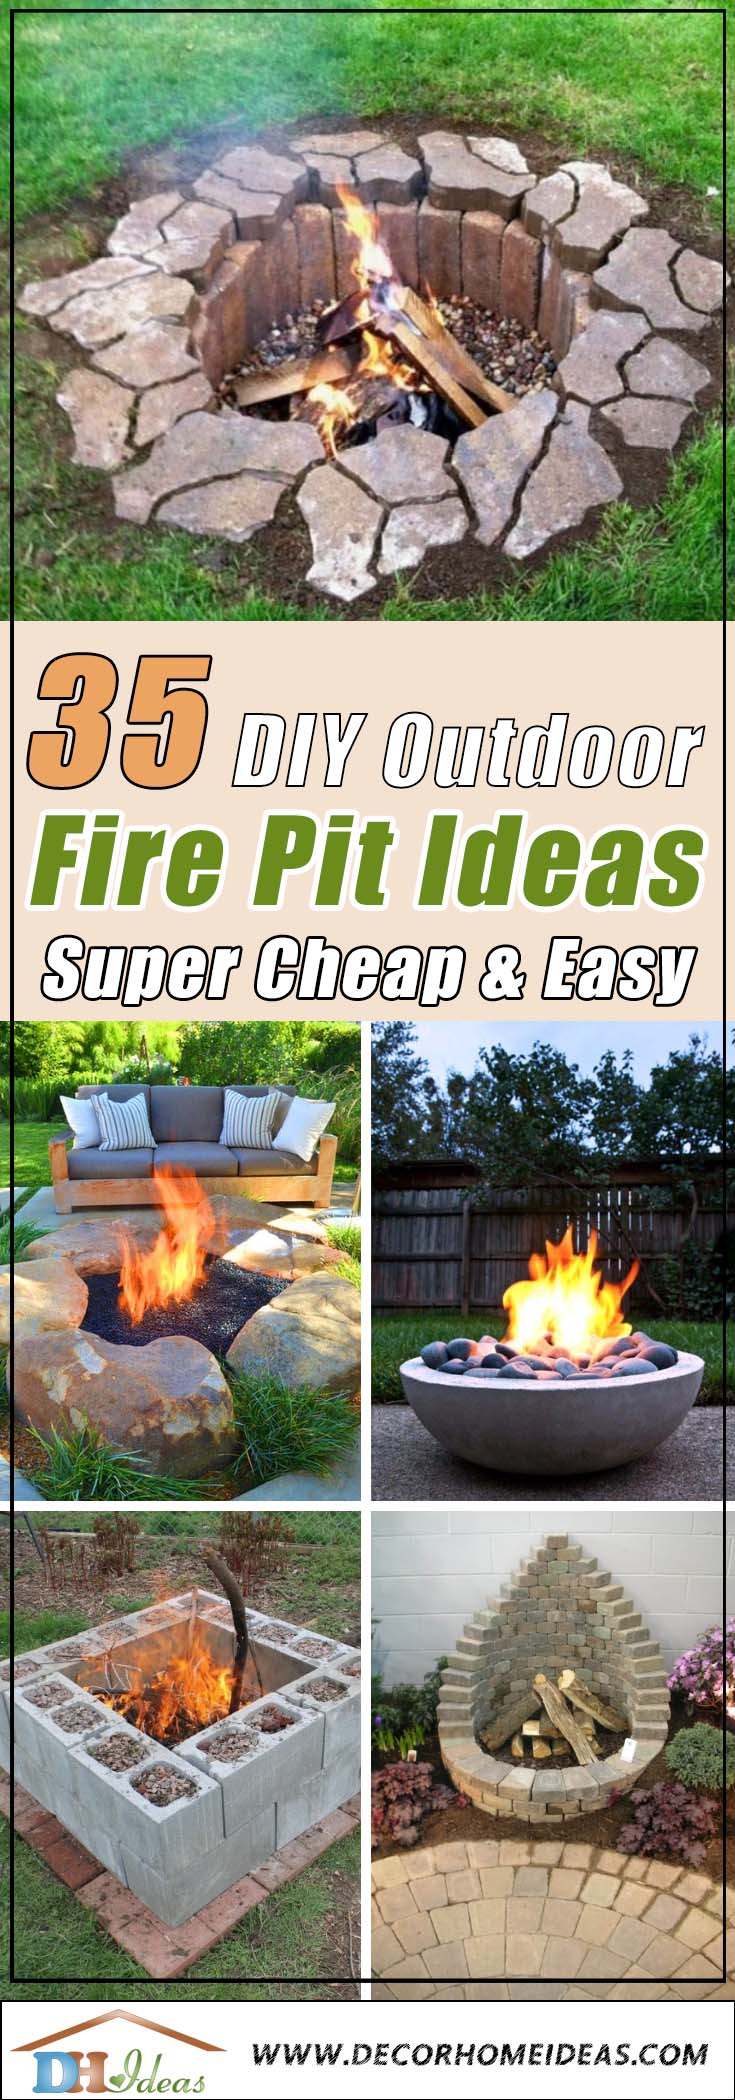 35 Easy To Do Fire Pit Ideas And, Diy Fire Pit Area